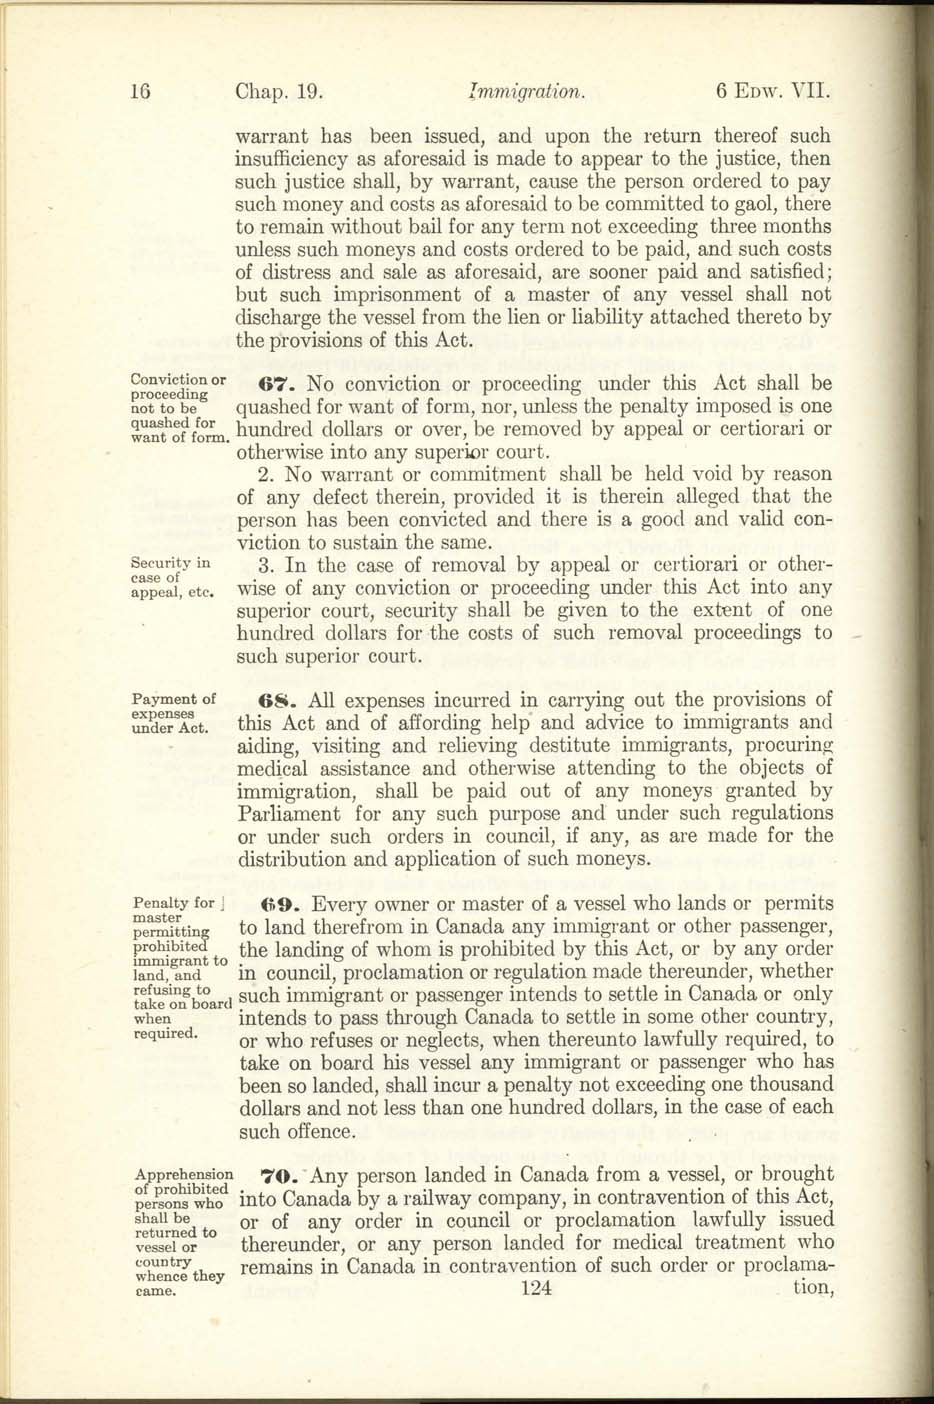 Chap. 19 Page 124 Immigration Act, 1906